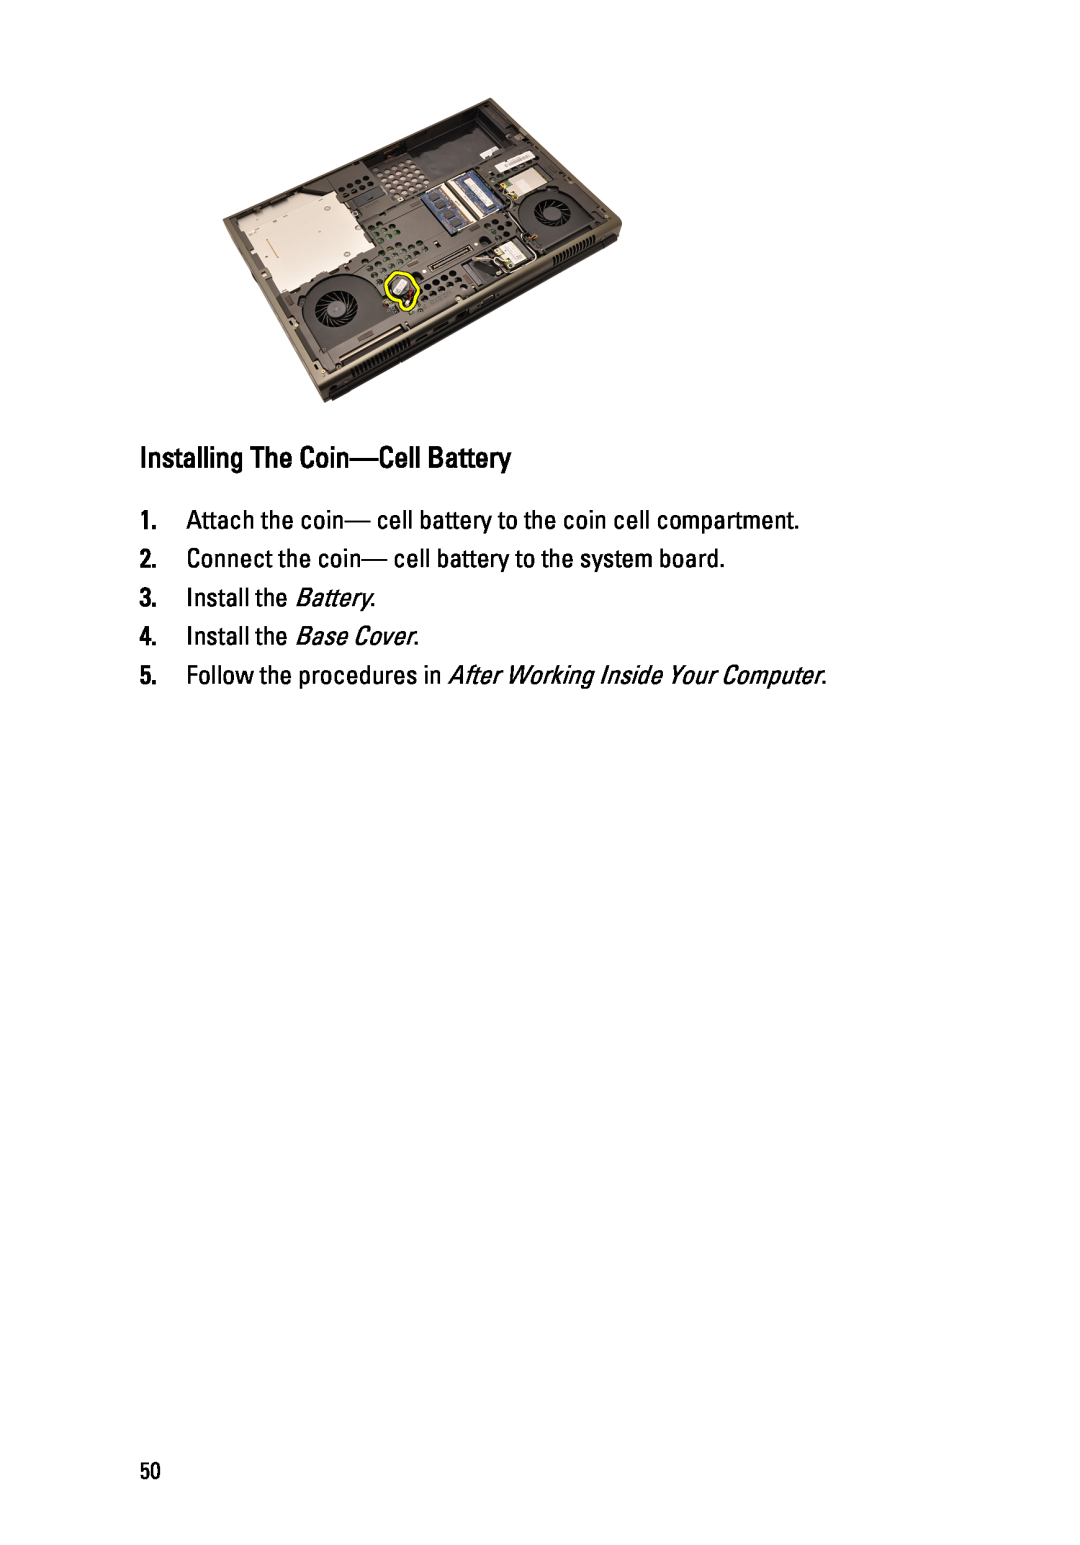 Dell M4600 owner manual Installing The Coin-Cell Battery, Attach the coin- cell battery to the coin cell compartment 